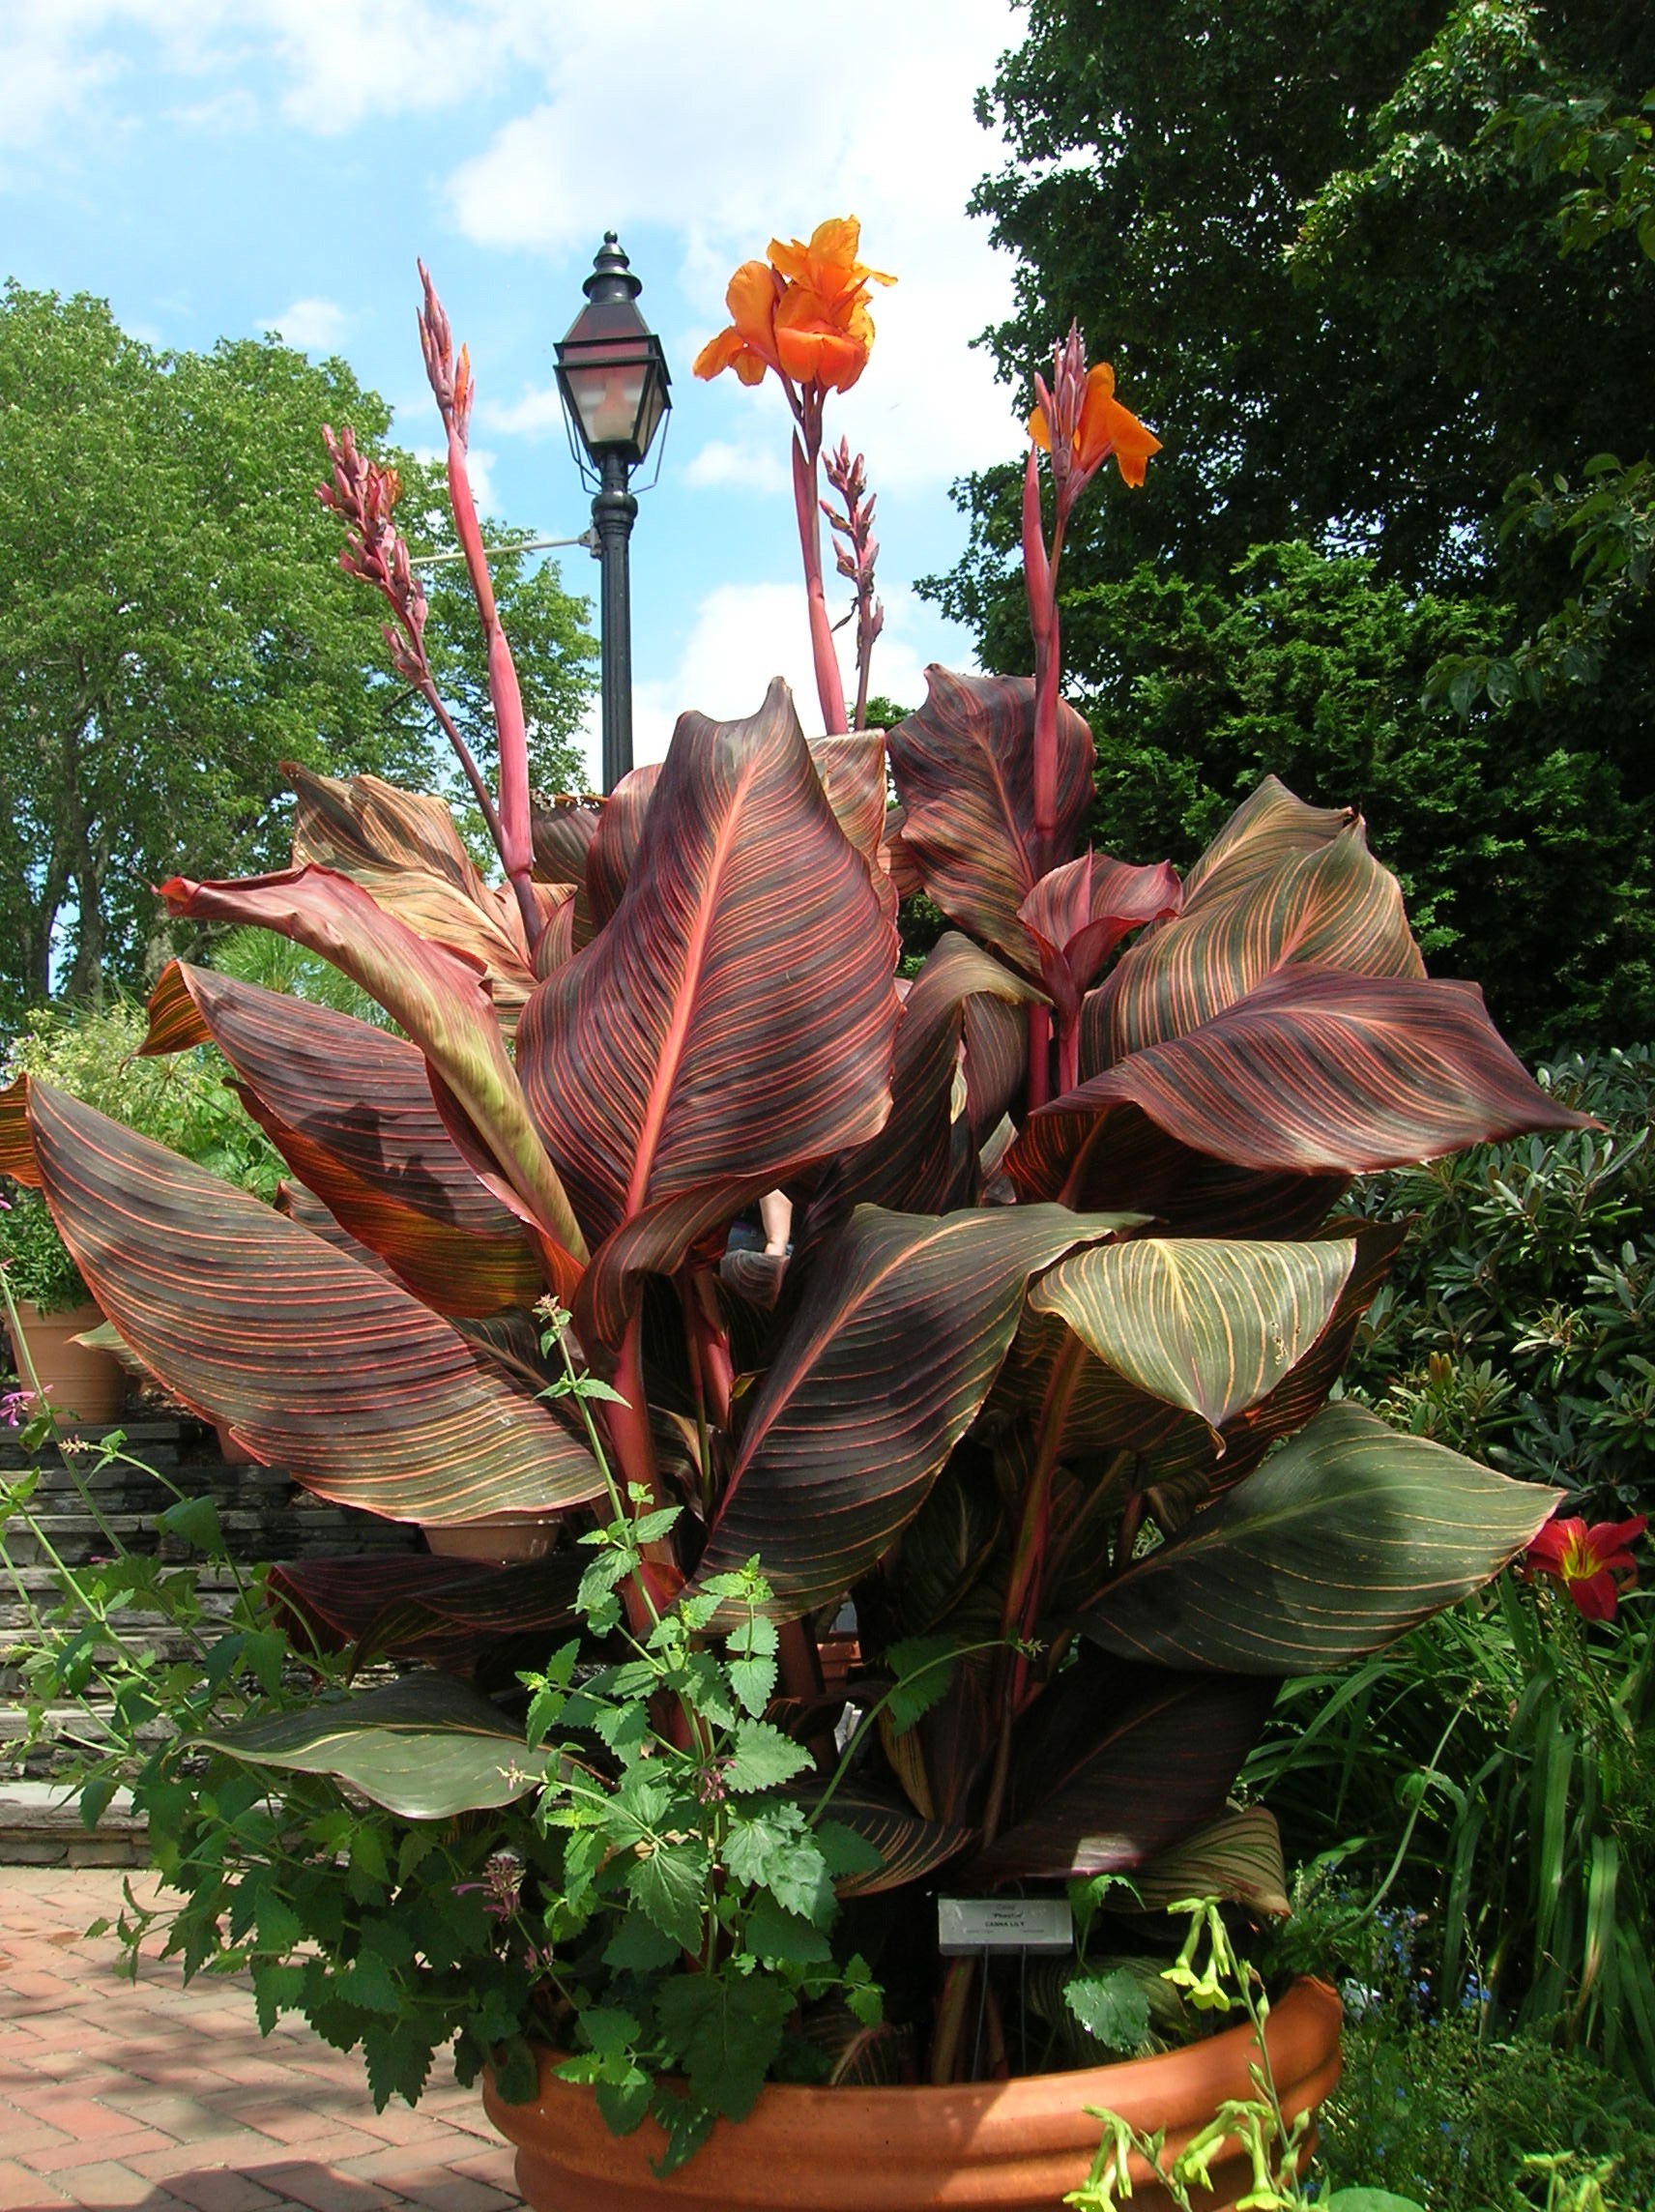 How to Grow: Canna Lilies, Growing and Caring for Canna Lilies